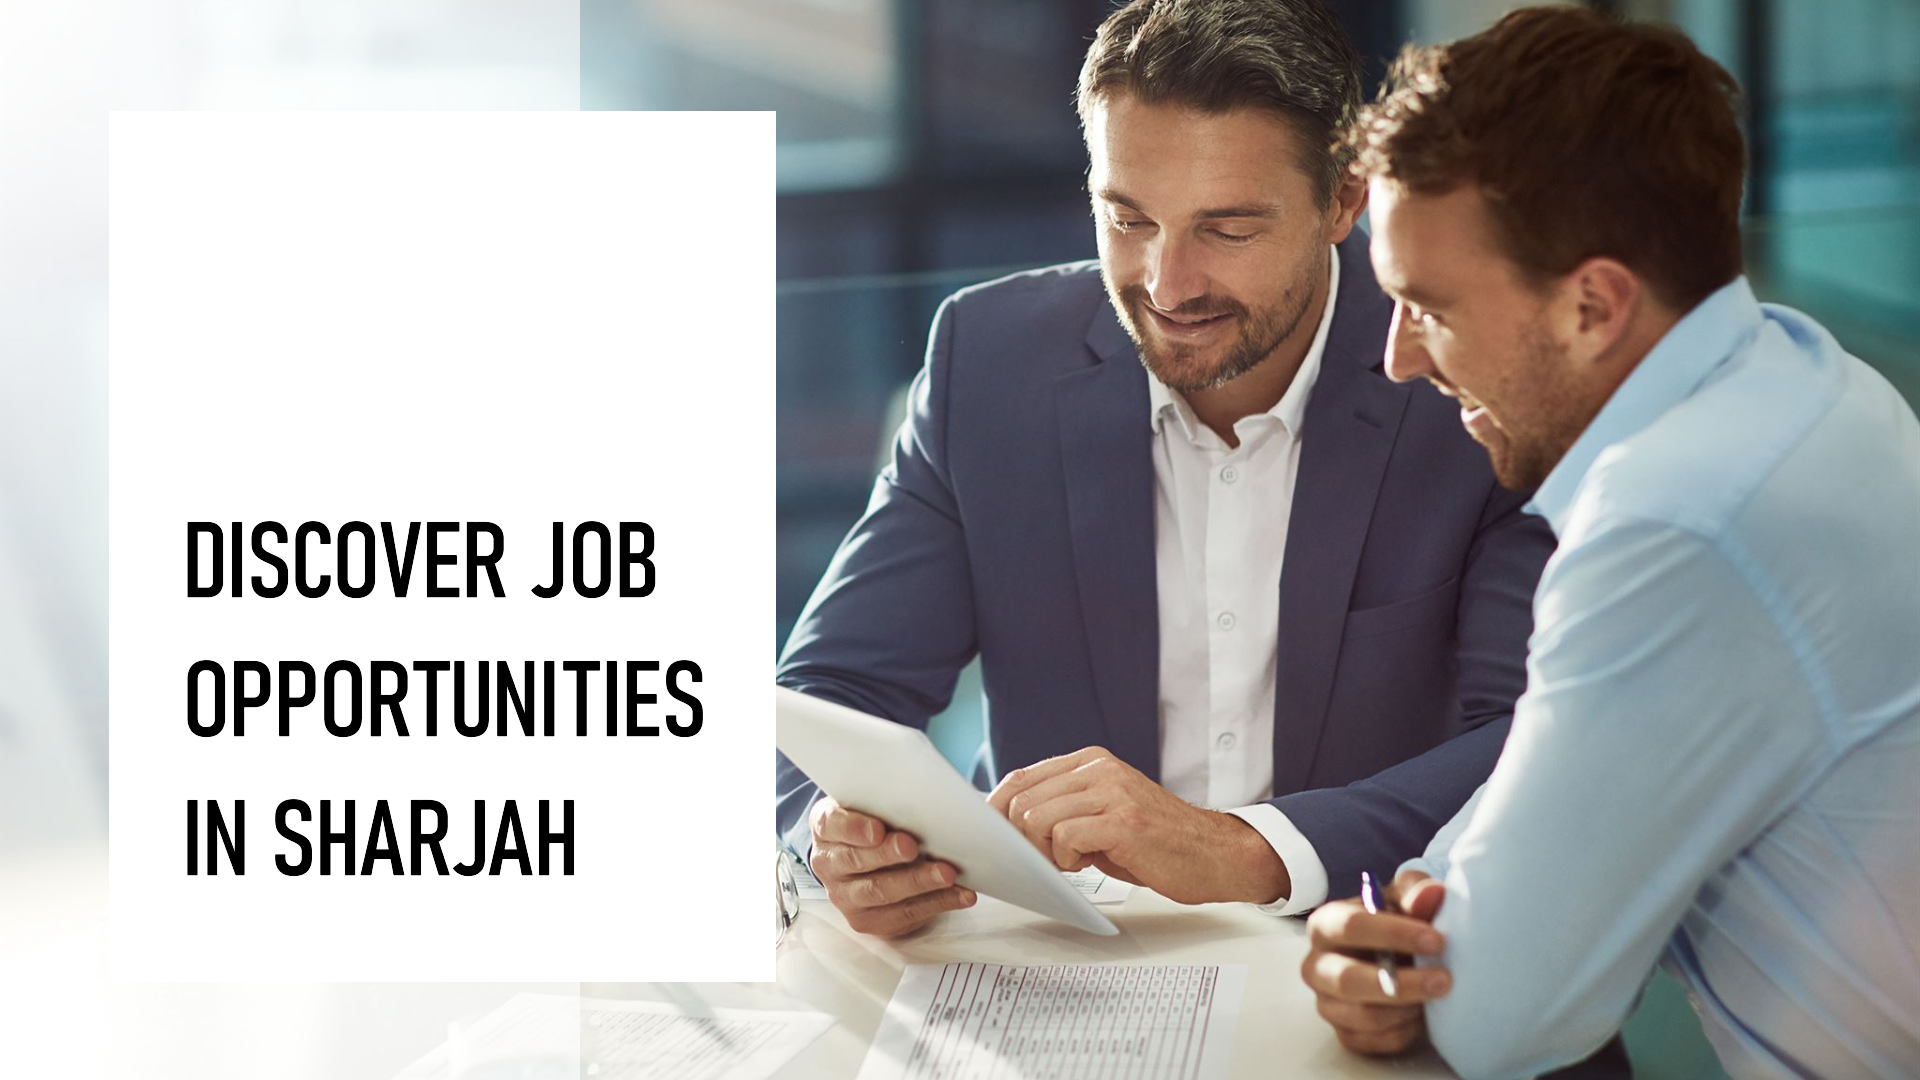 Job opportunities for Arabic and English speakers in Sharjah